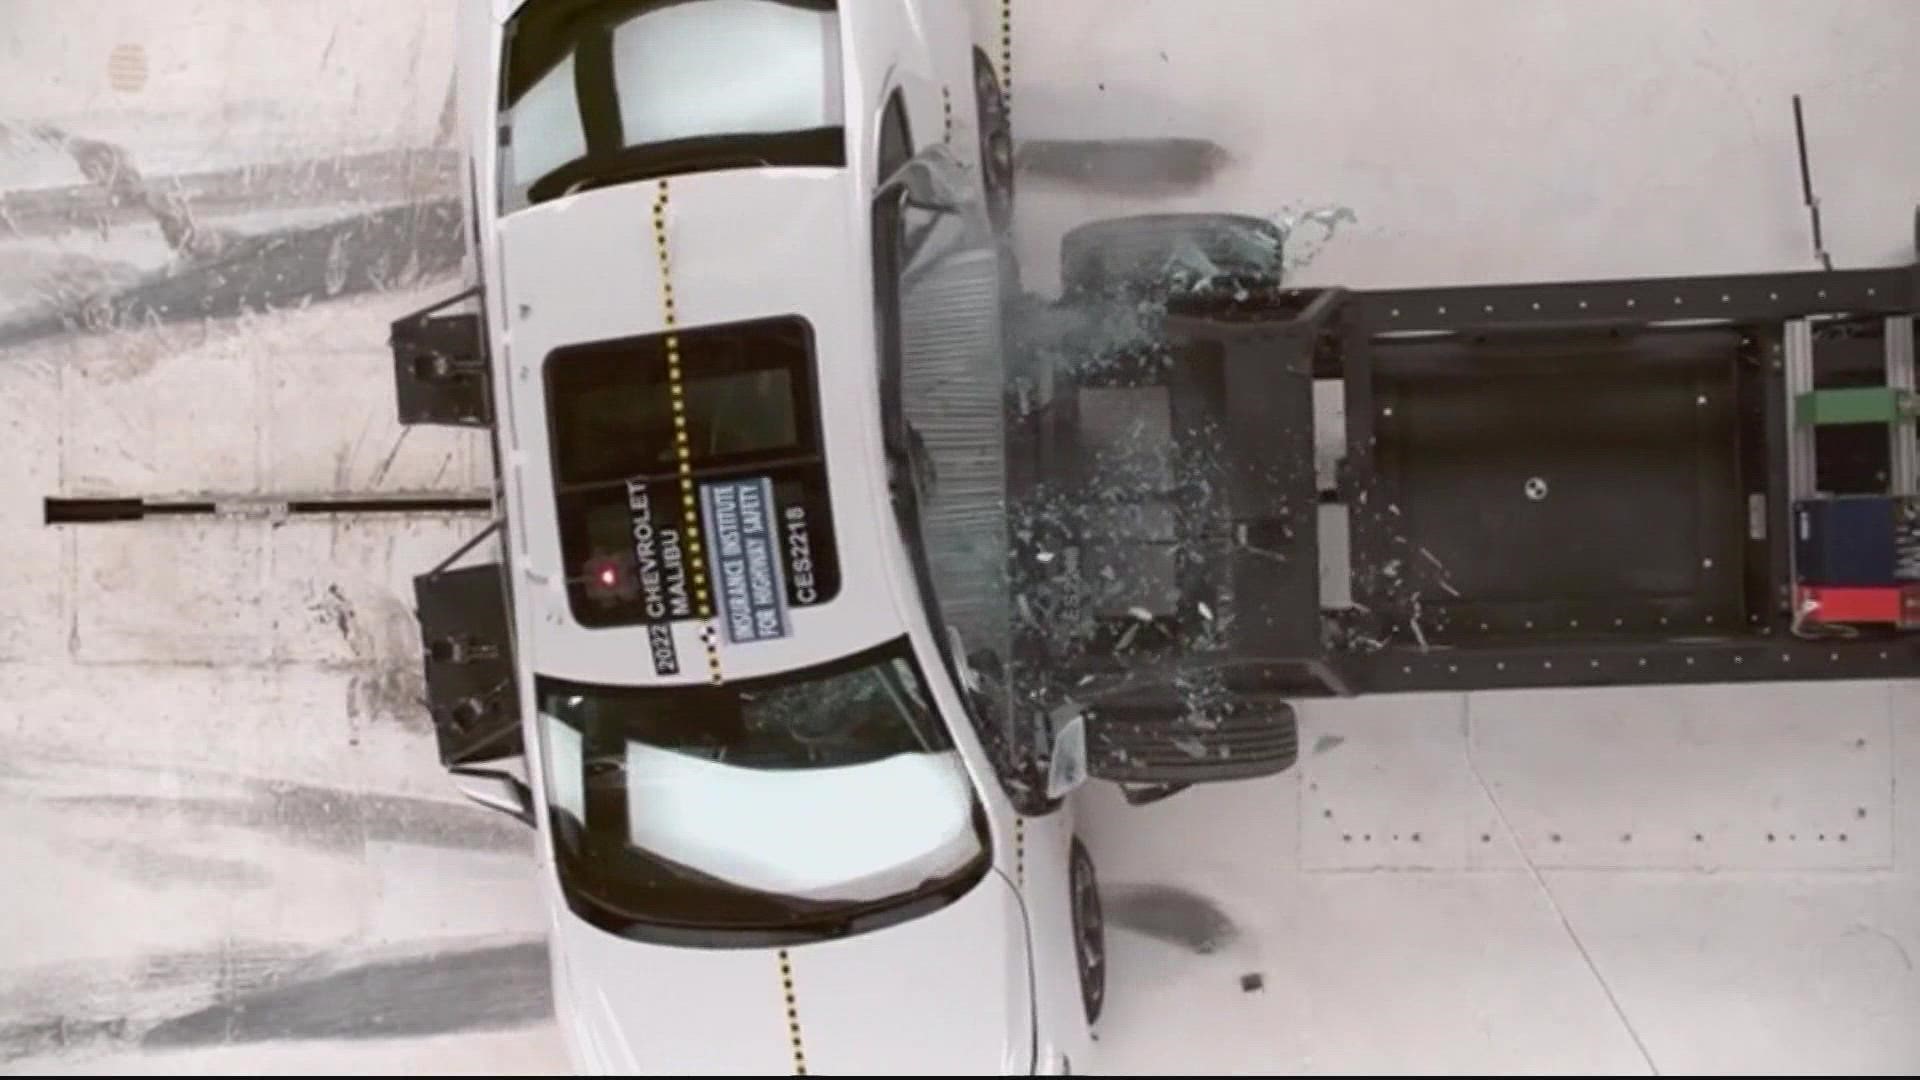 A new side crash test involving top-selling vehicles show troubling results